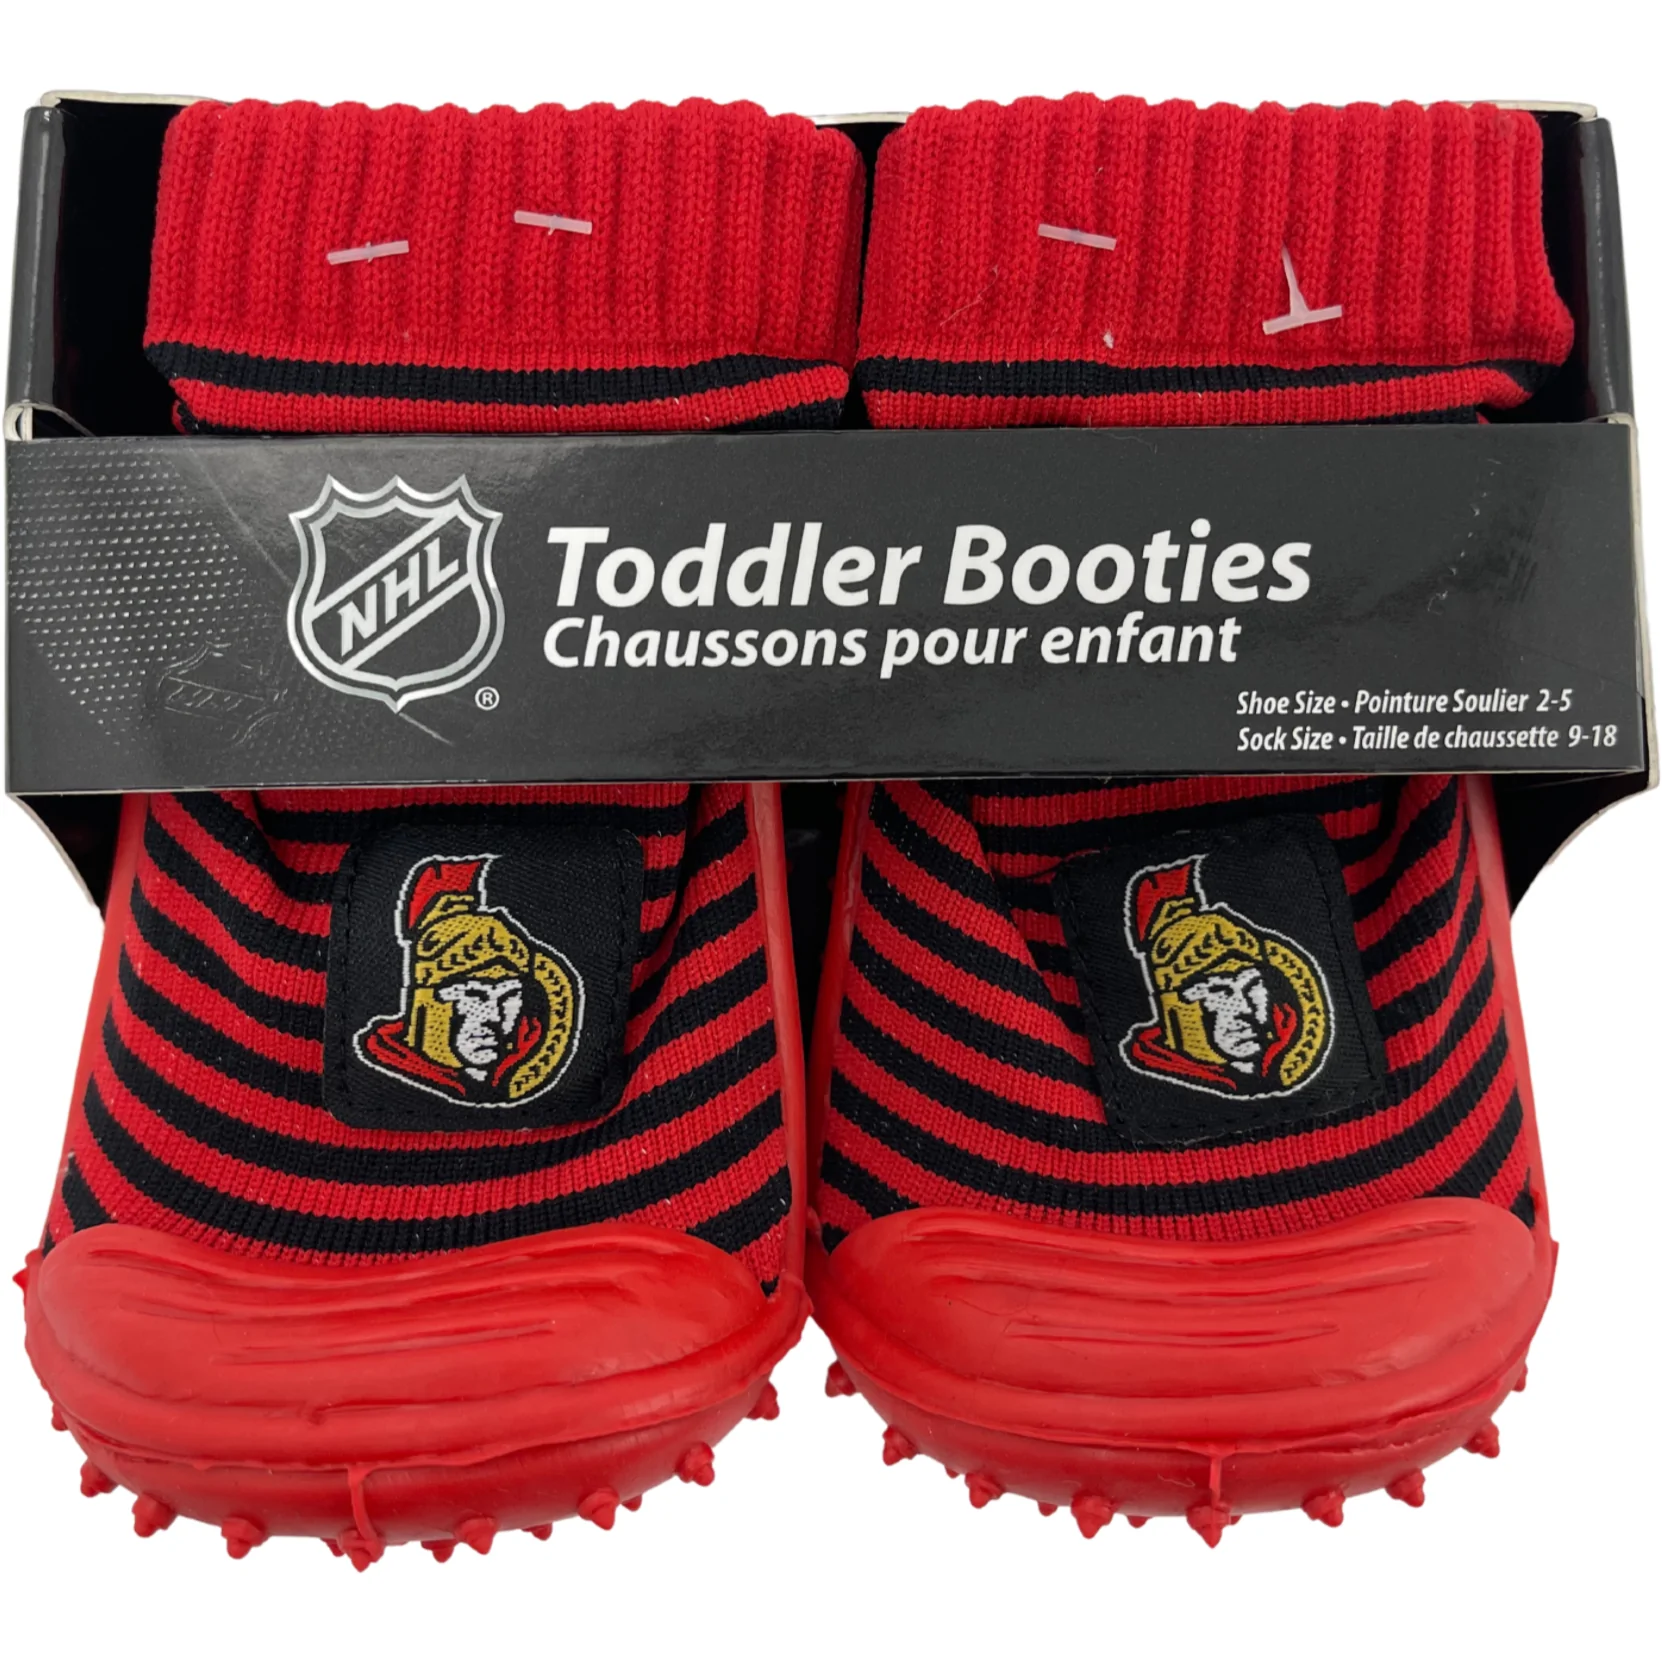 NHL Toddler's Booties / Ottawa Senators / Rubber Sole Booties with Grippers / Shoe Size 2-5 / Various Colours